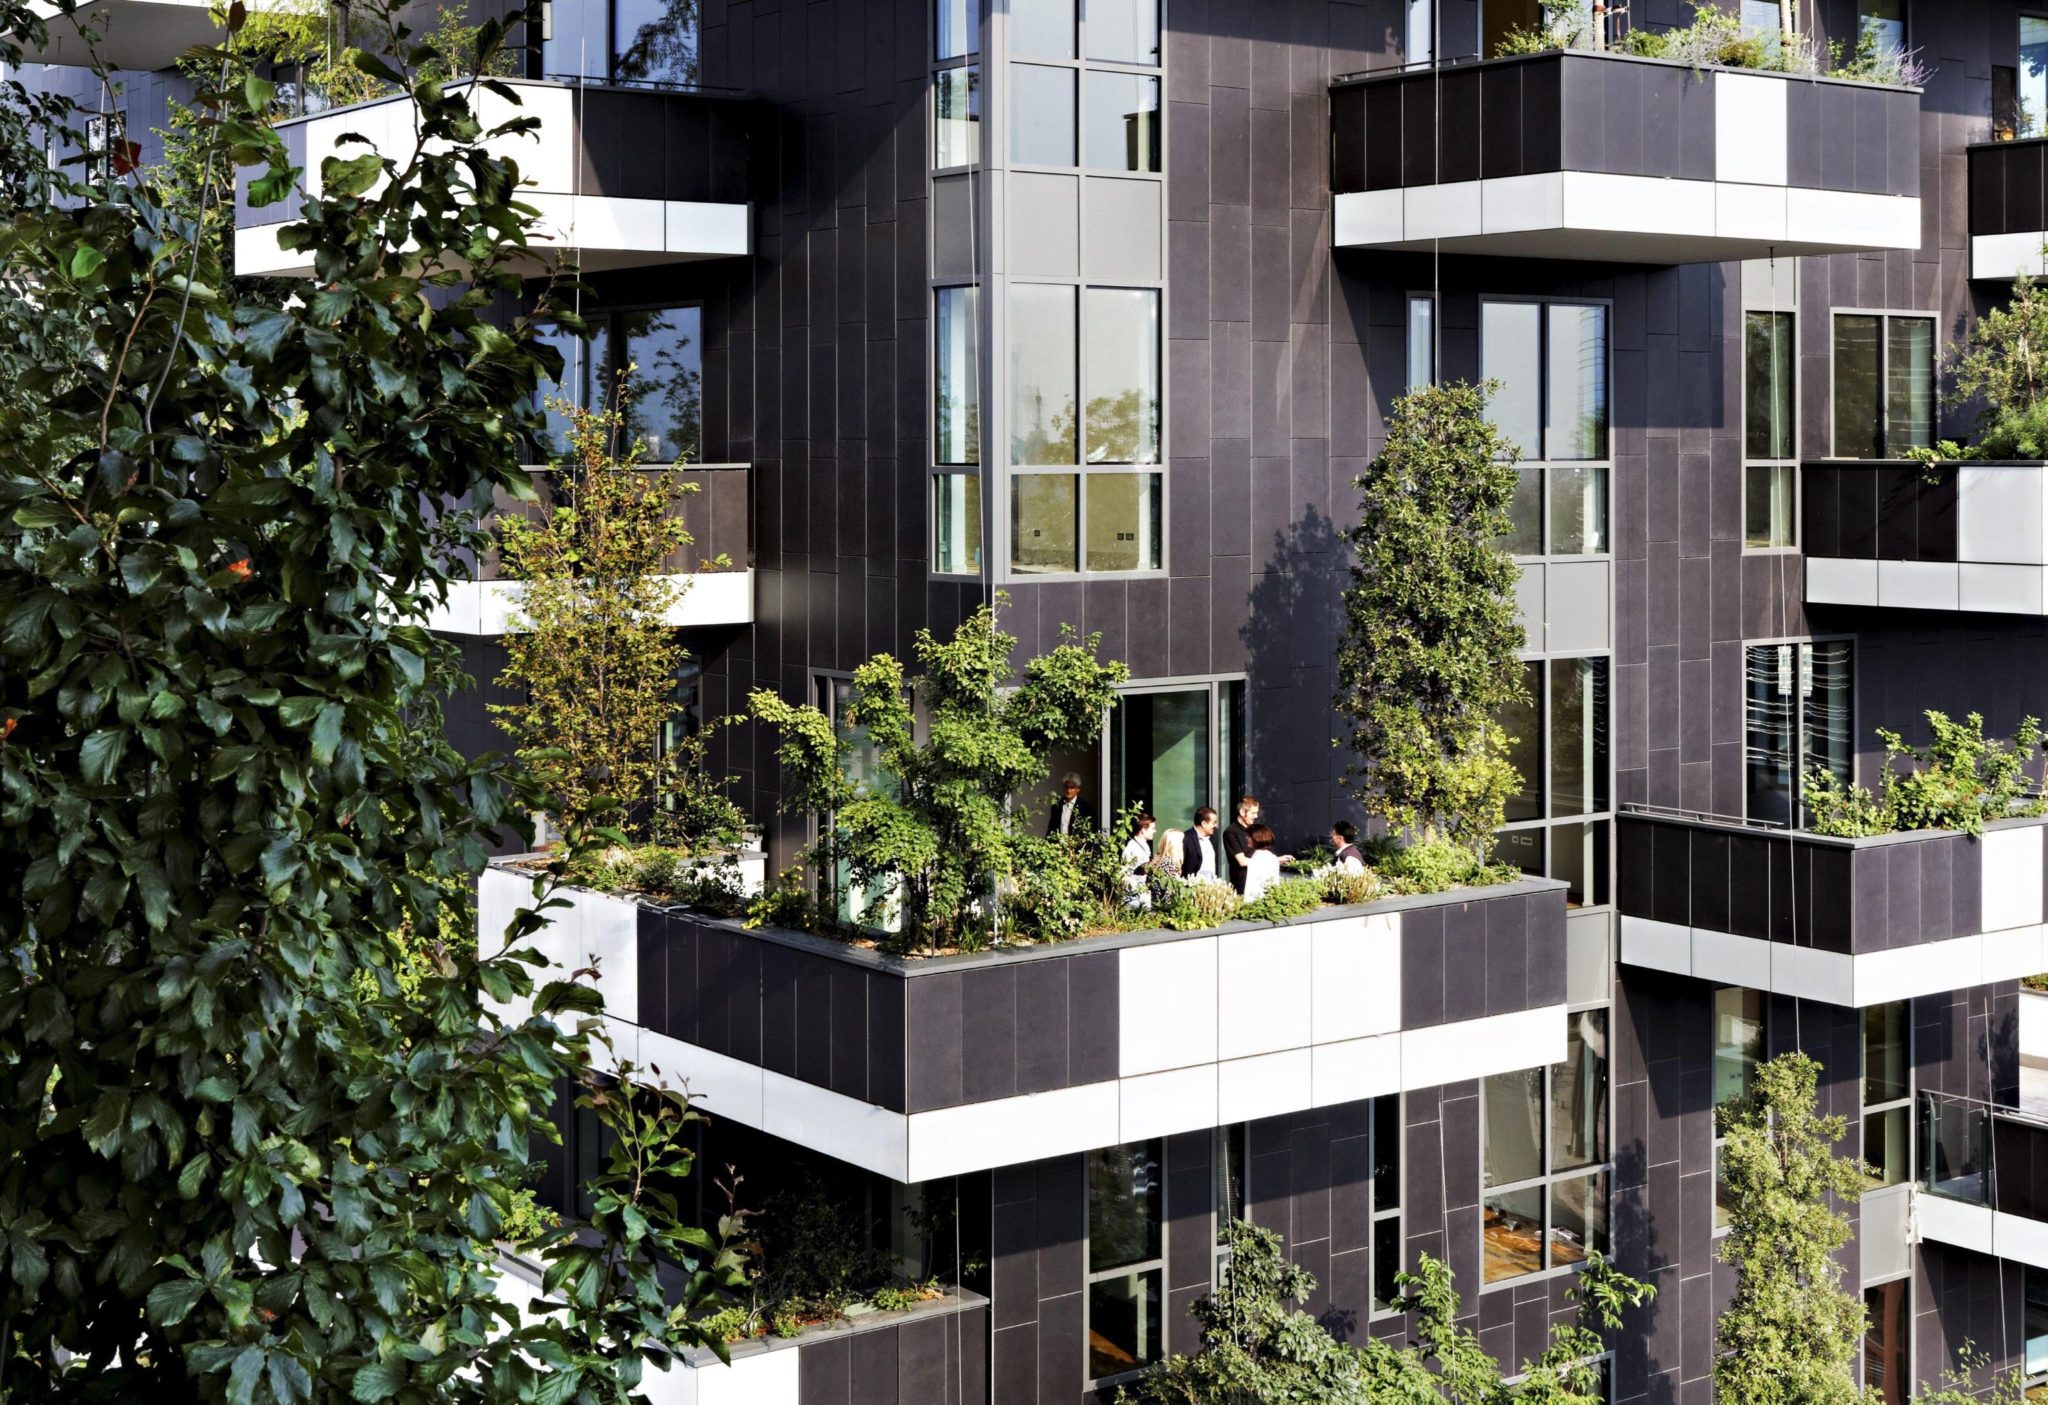 epa04495505 A handout released by the German Architecture Museum shows the gardens of the office highrise Bosco Verticale in Milan, Italy, 27 June 2014. The unusual building has won the International Highrise Award worth 50,000 euros. It has been awarded every two years by the city of Frankfurt and the German Architecture Museum since 2004.  EPA/KIRSTEN BUCHER / HANDOUT MANDATORY CREDIT HANDOUT EDITORIAL USE ONLY/NO SALES